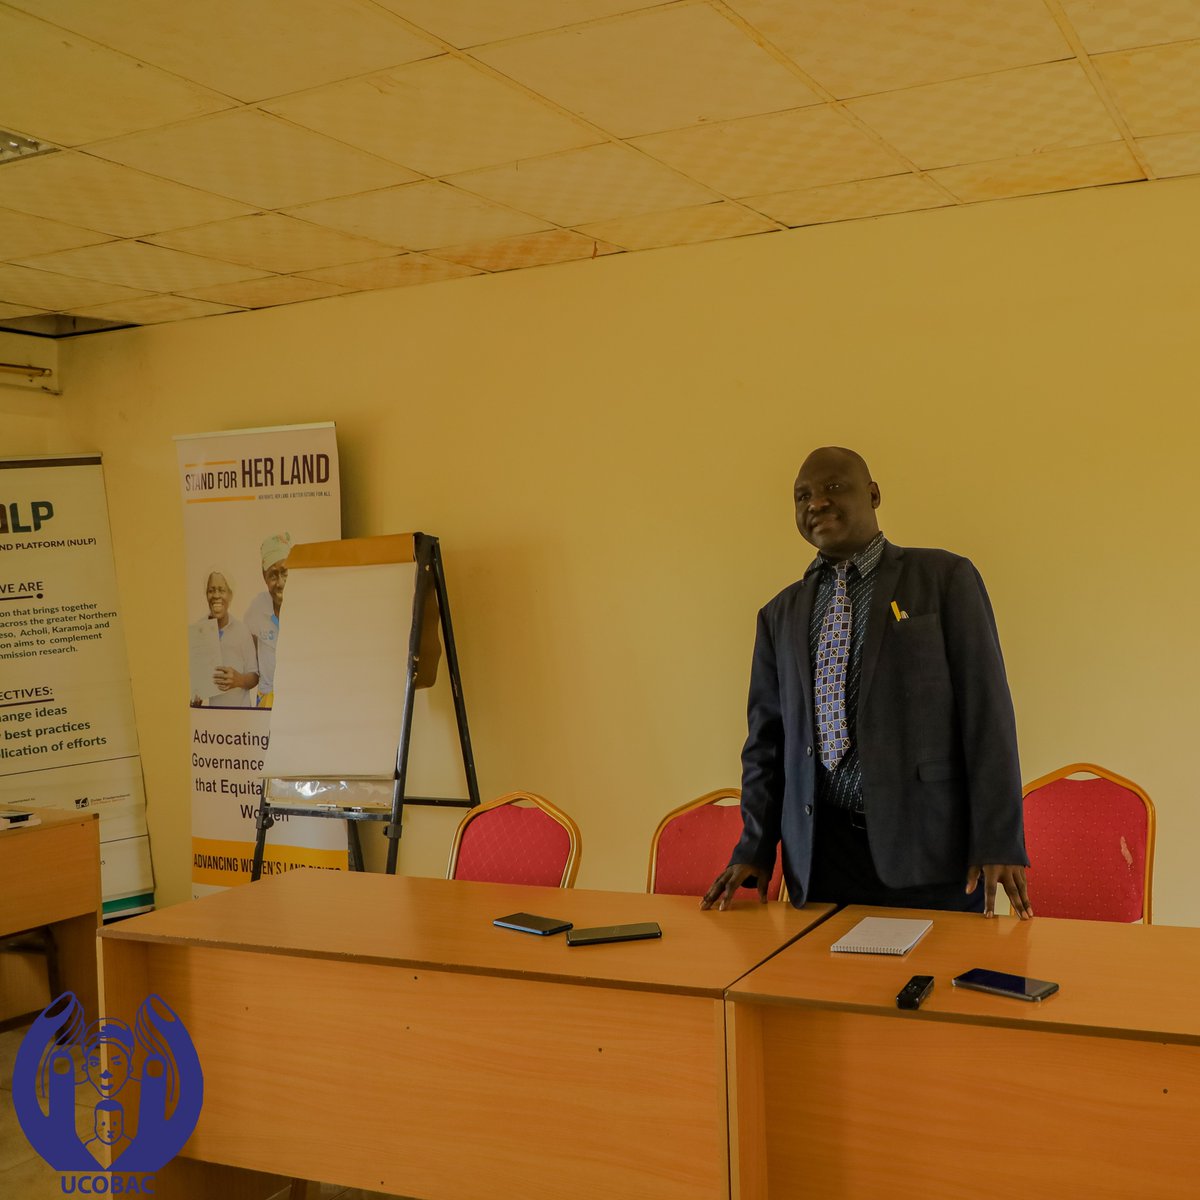 The Lira Deputy CAO , Mr Emmanuel Ogwayu has officially opened the Regional multi stakeholder budget  round table dialogue. In his address, he noted that WLRs  are continuously being  recognized but called for further action.
#Stand4herland #HerLandHerRight